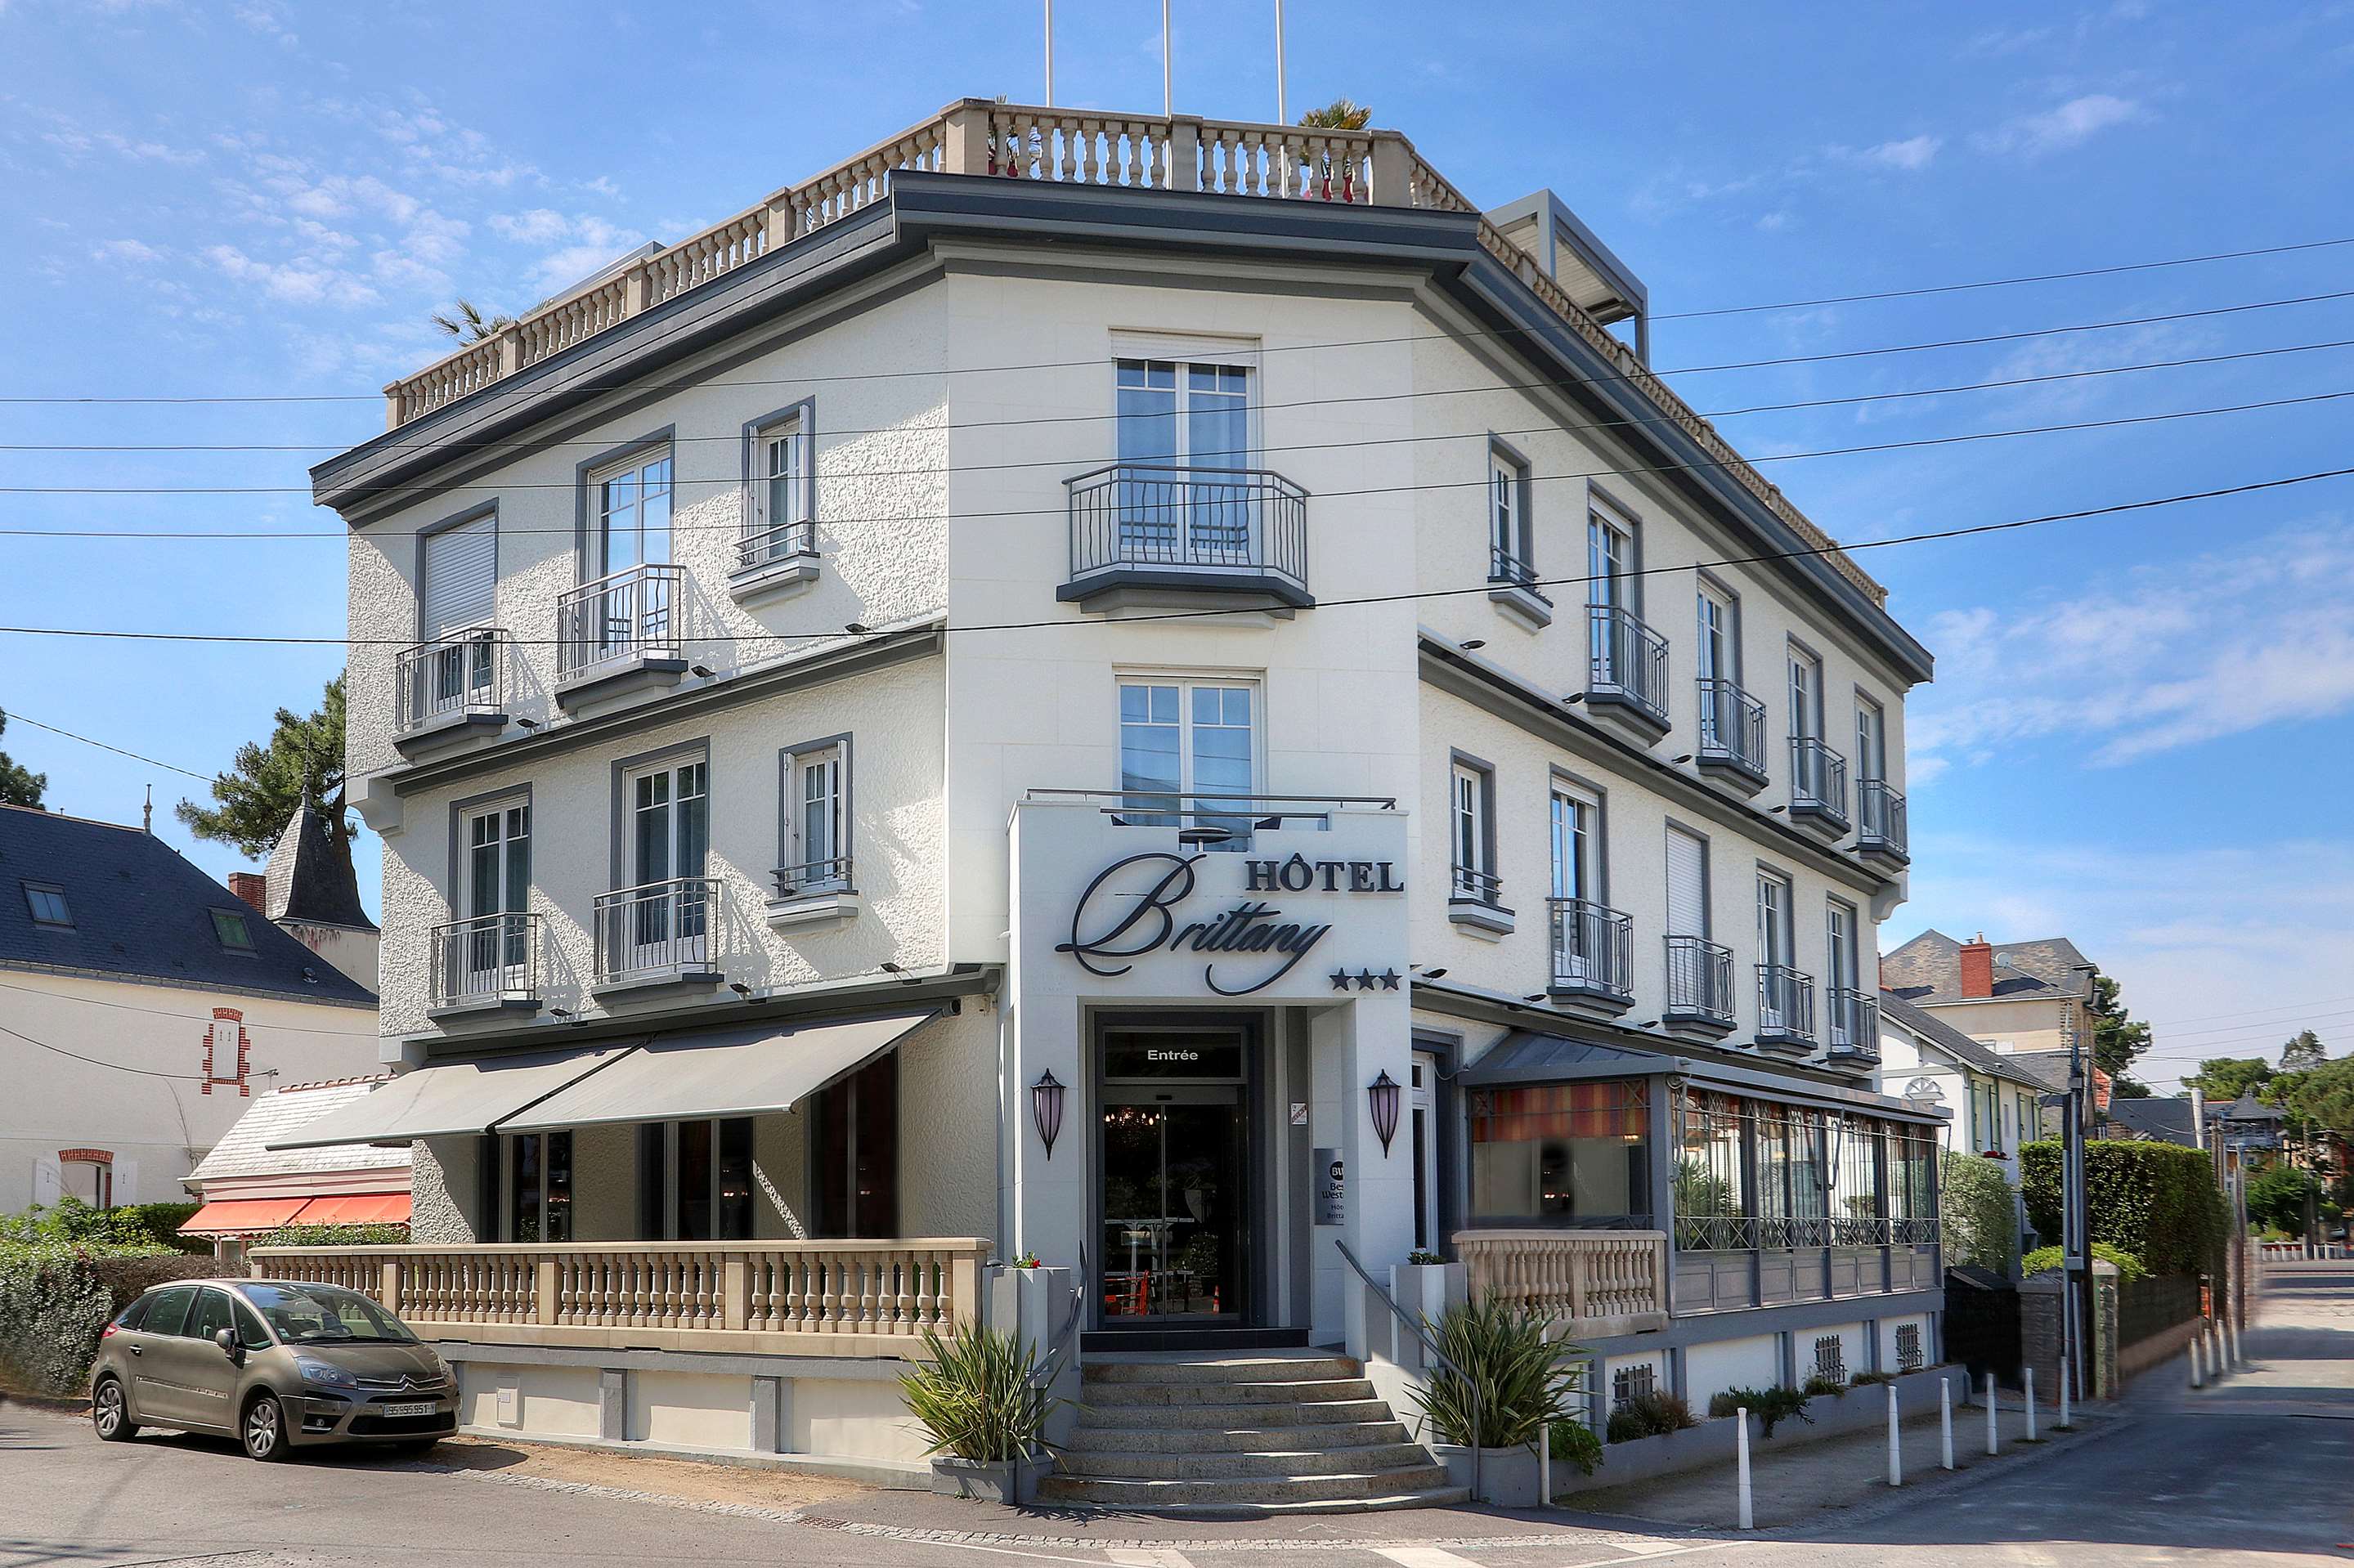 La Baule-Escoublac Travel Guide 2023 - Things to Do, What To Eat & Tips |  Trip.com